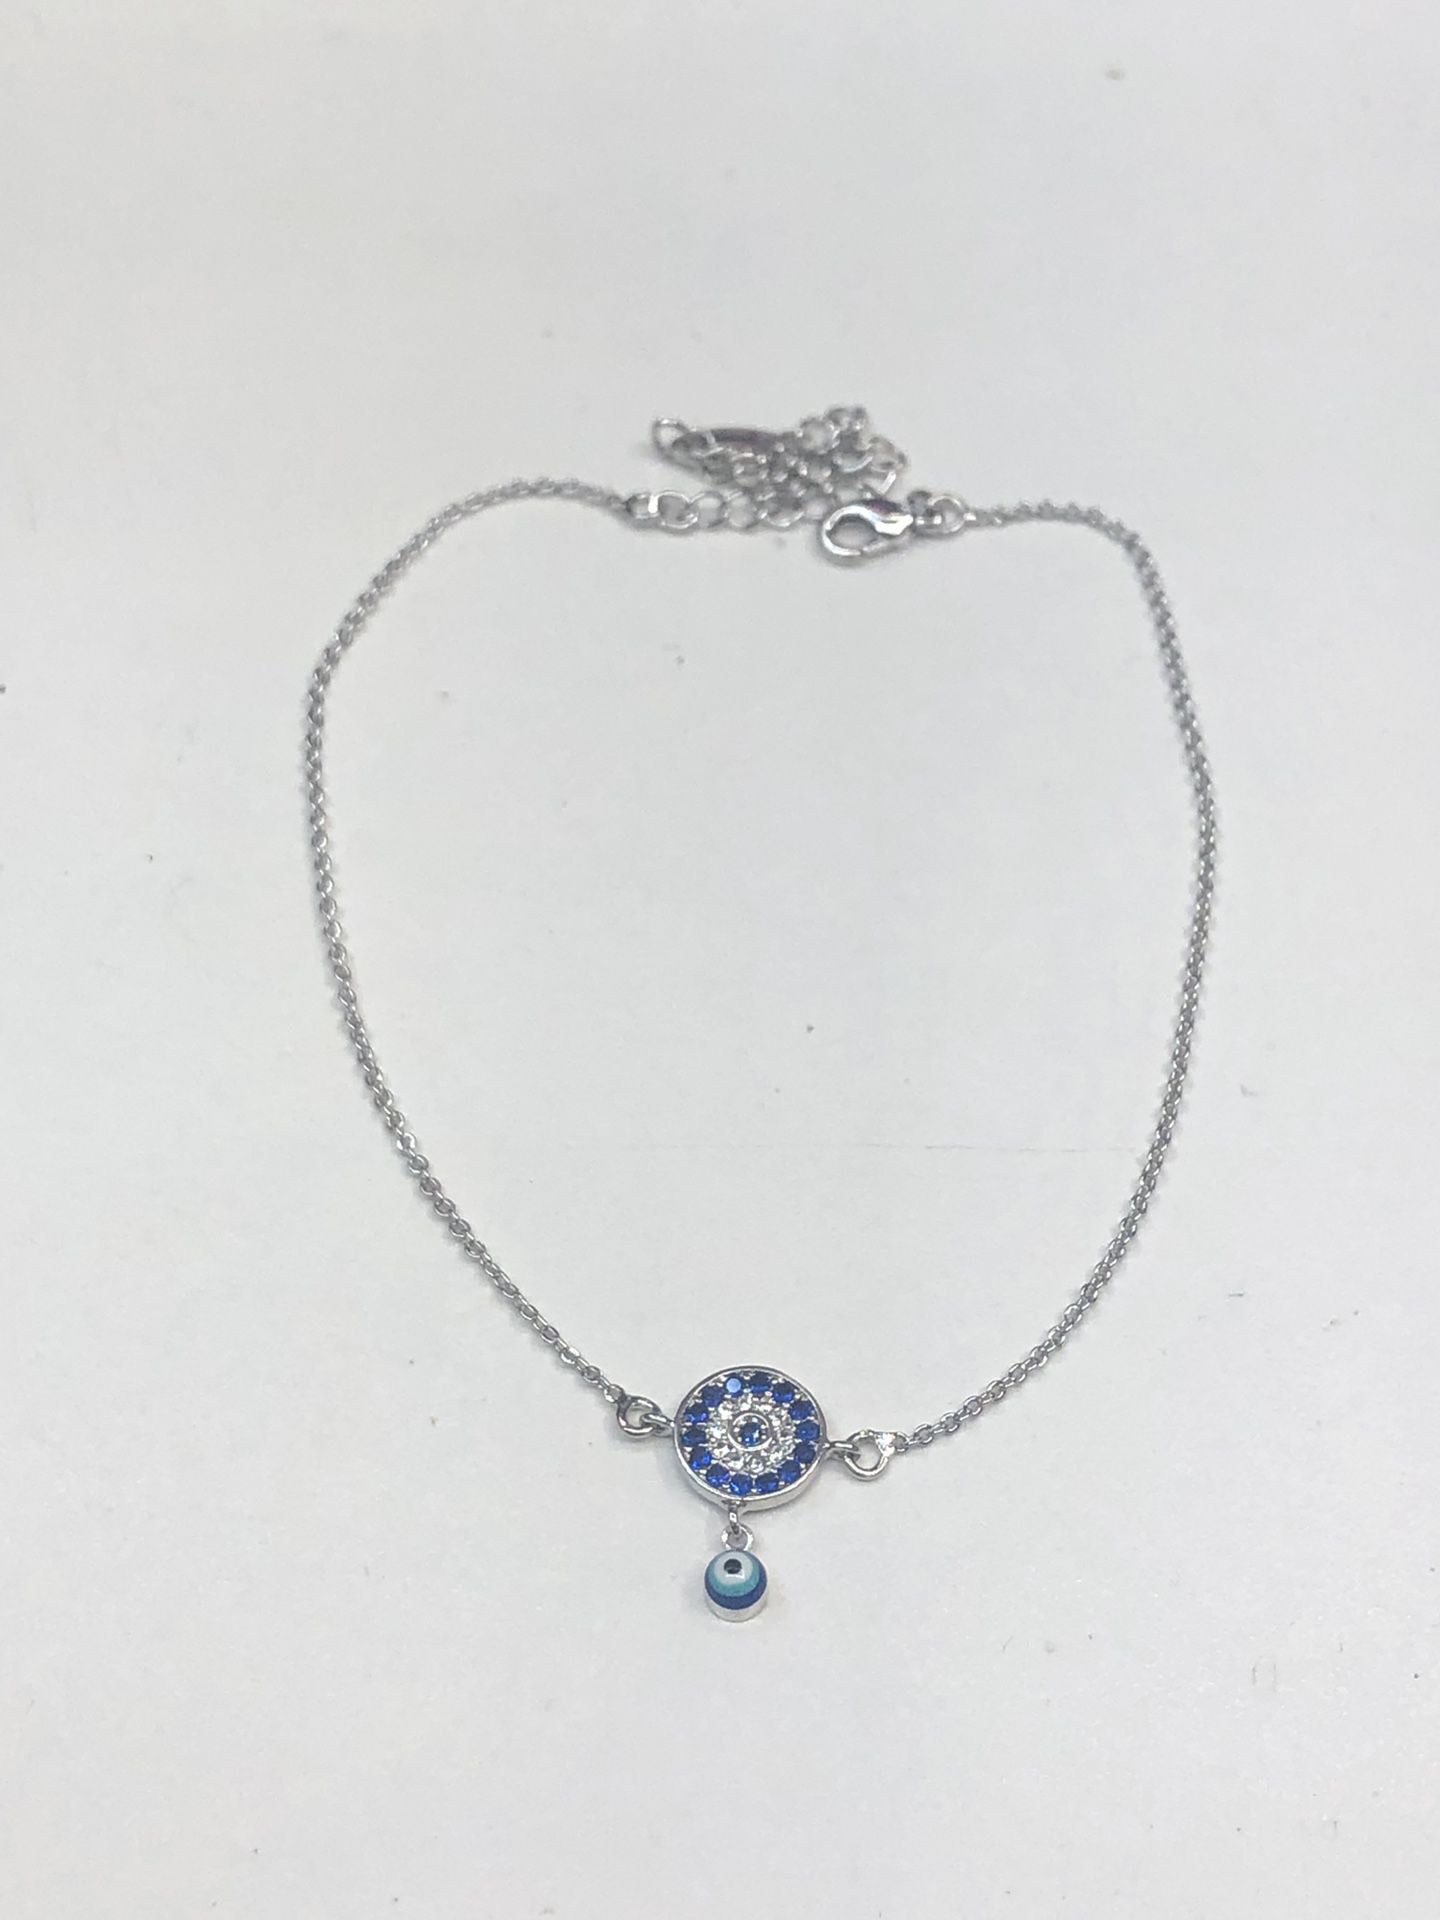 A beautiful cubic zirconia stones Eye rhodium dipped anklet with dropping Eye stone best quality I got all lengths best quality!! Shipping is free